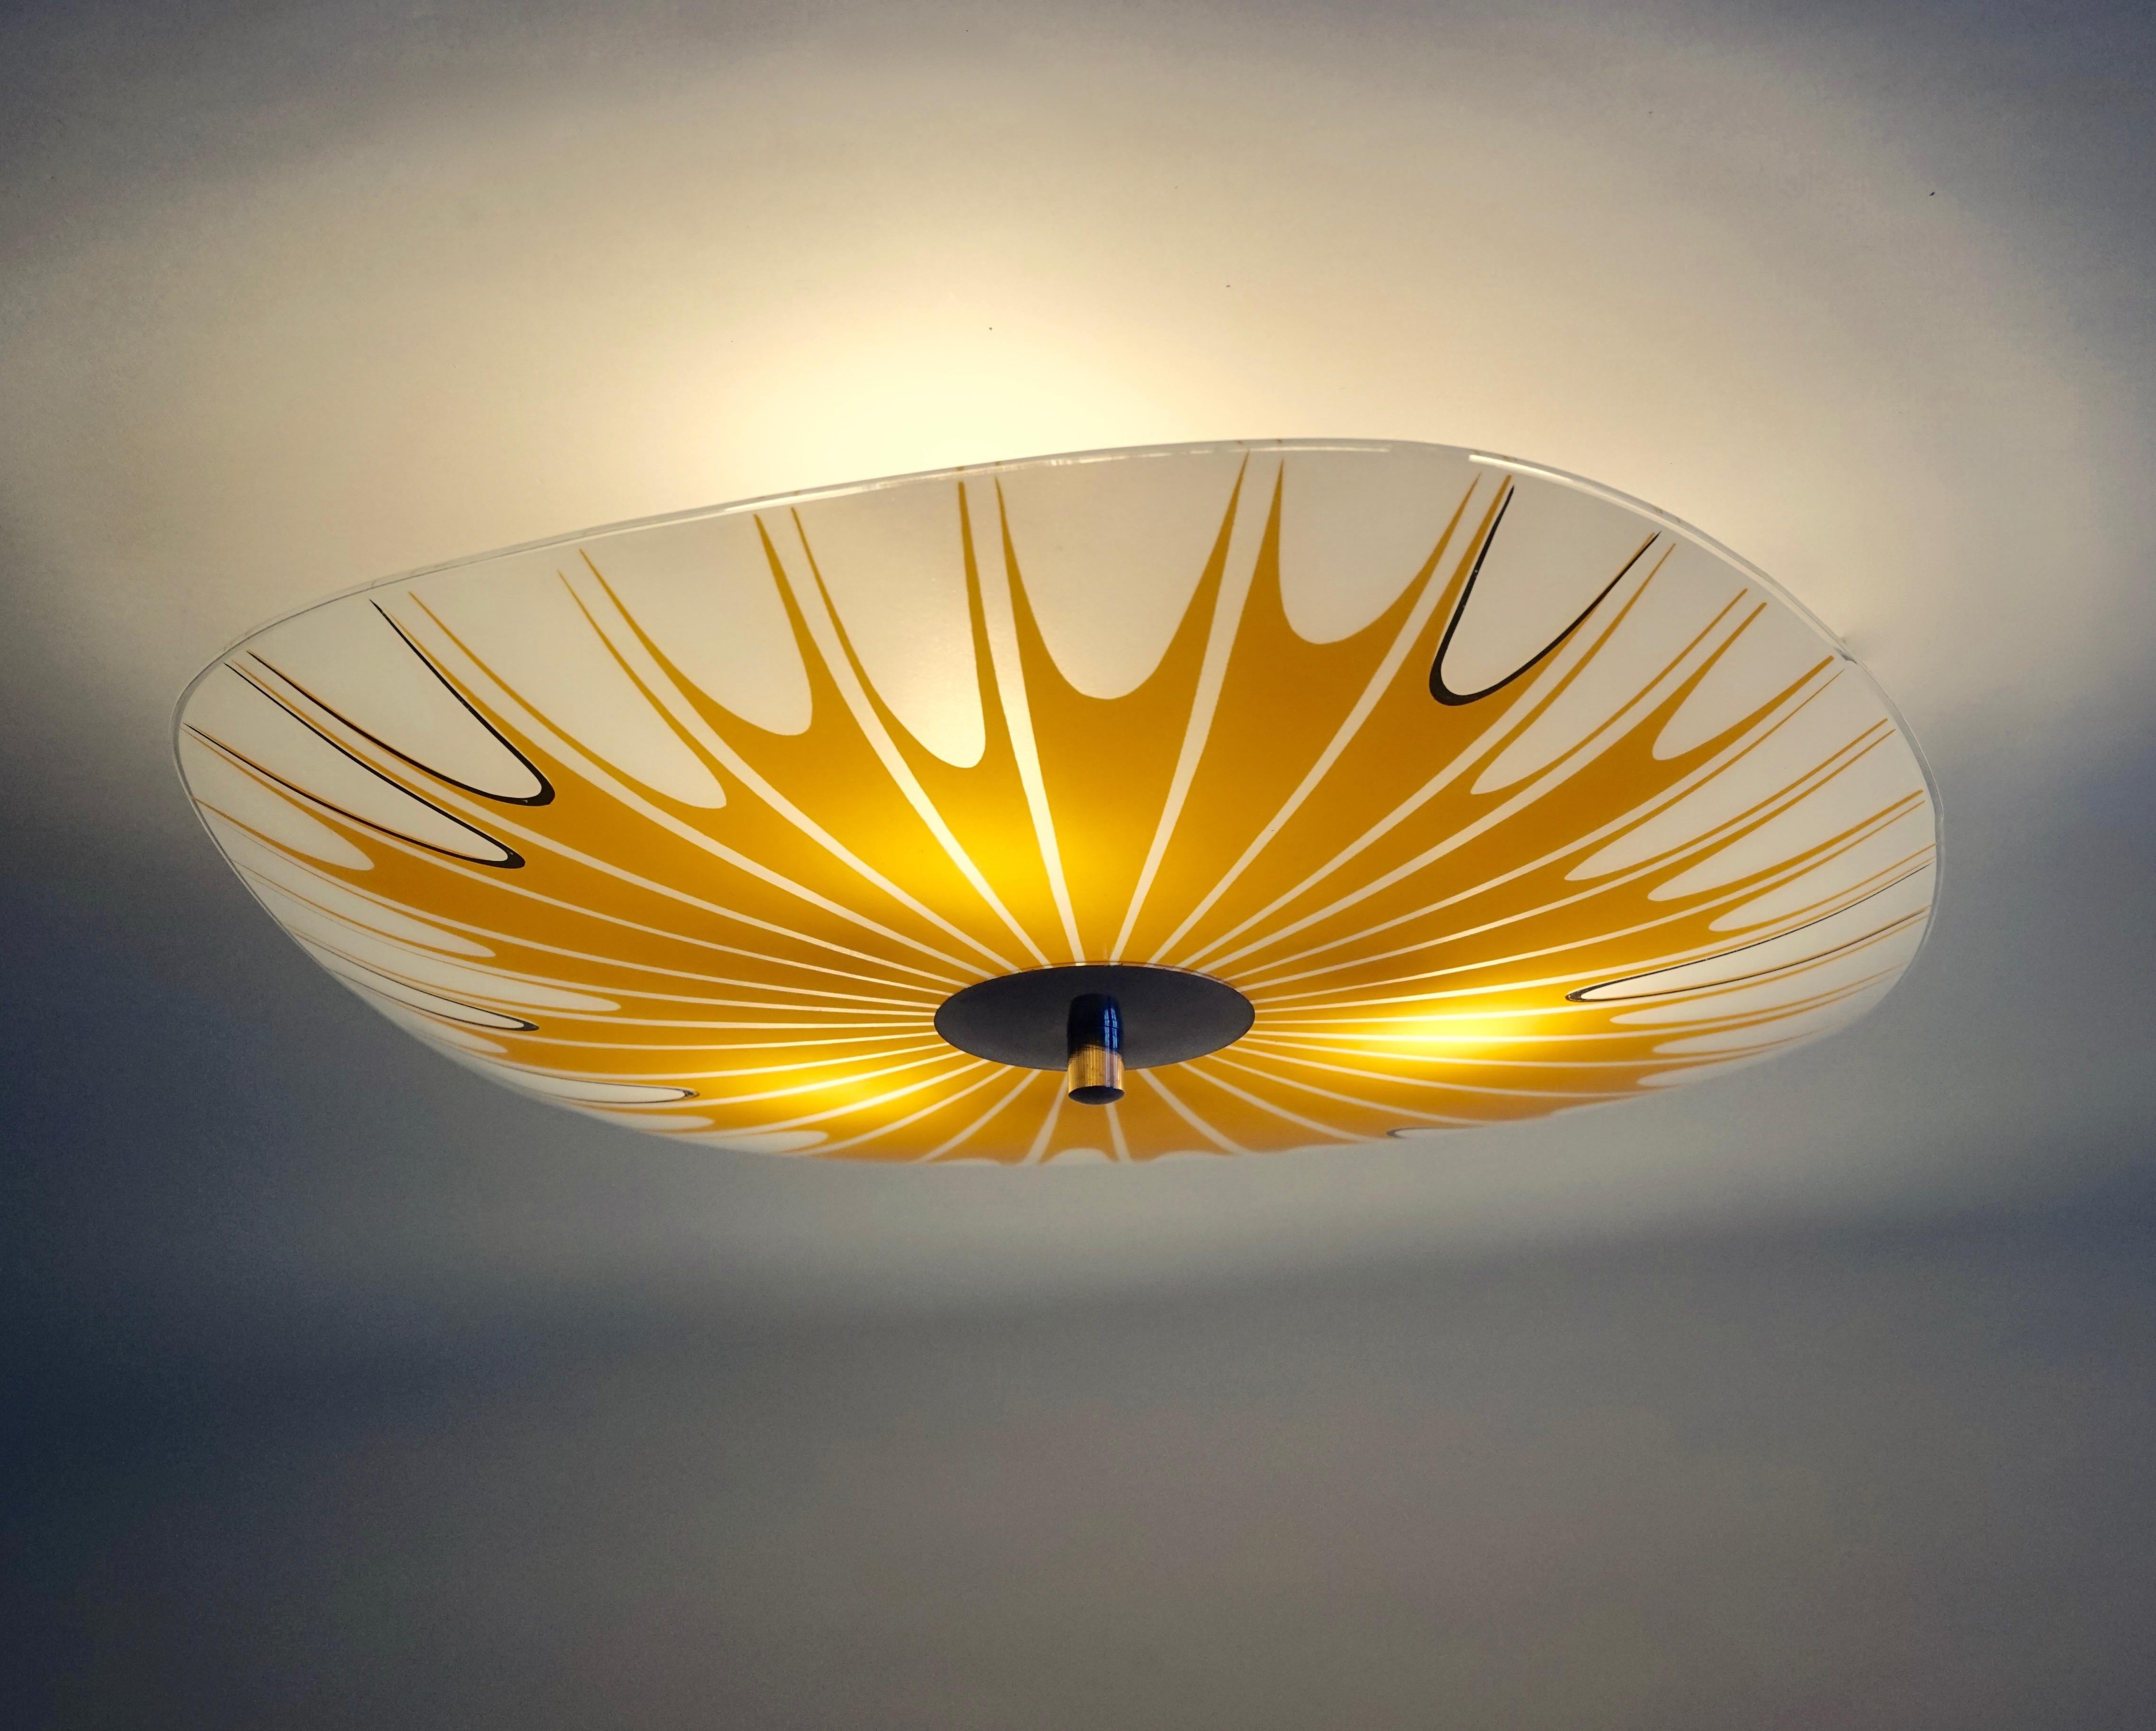 Mid-Century Modern Brussels Styled Ceiling Lamps, 1950s-1960s from Napako For Sale